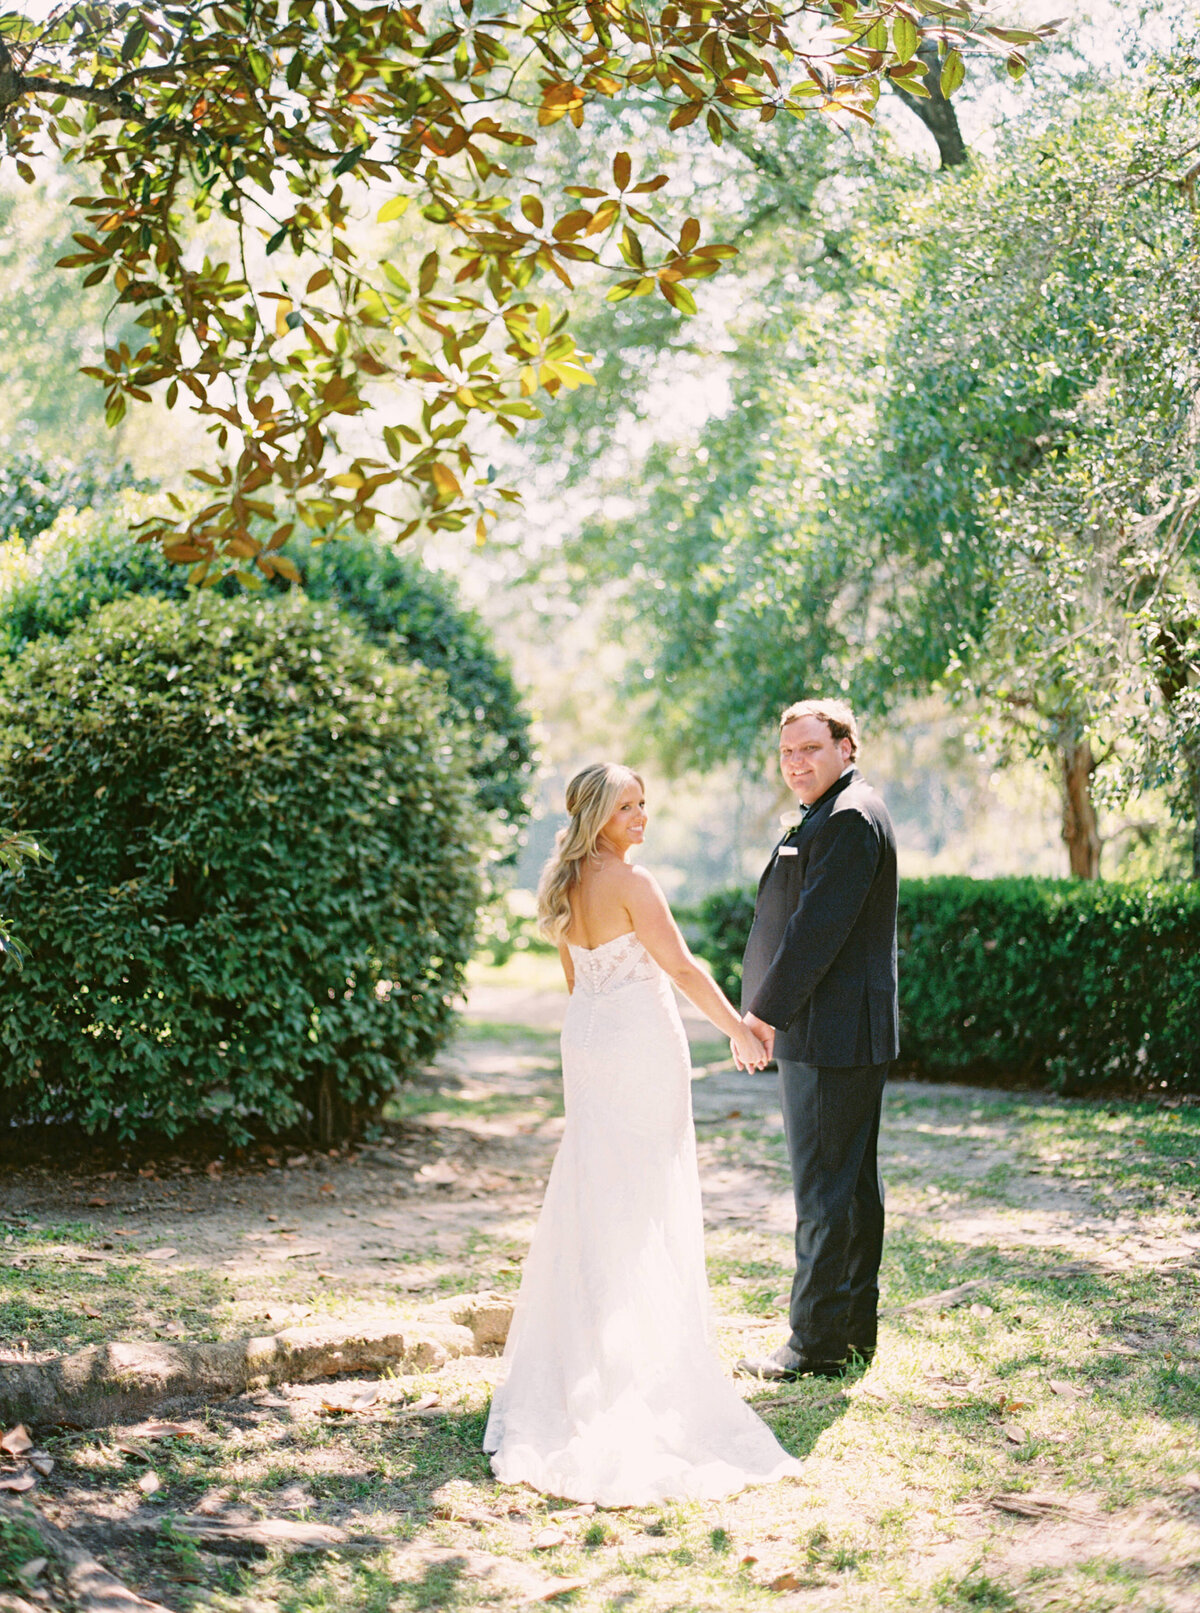 A wedding at Pebble Hill in Thomasville GA - 5